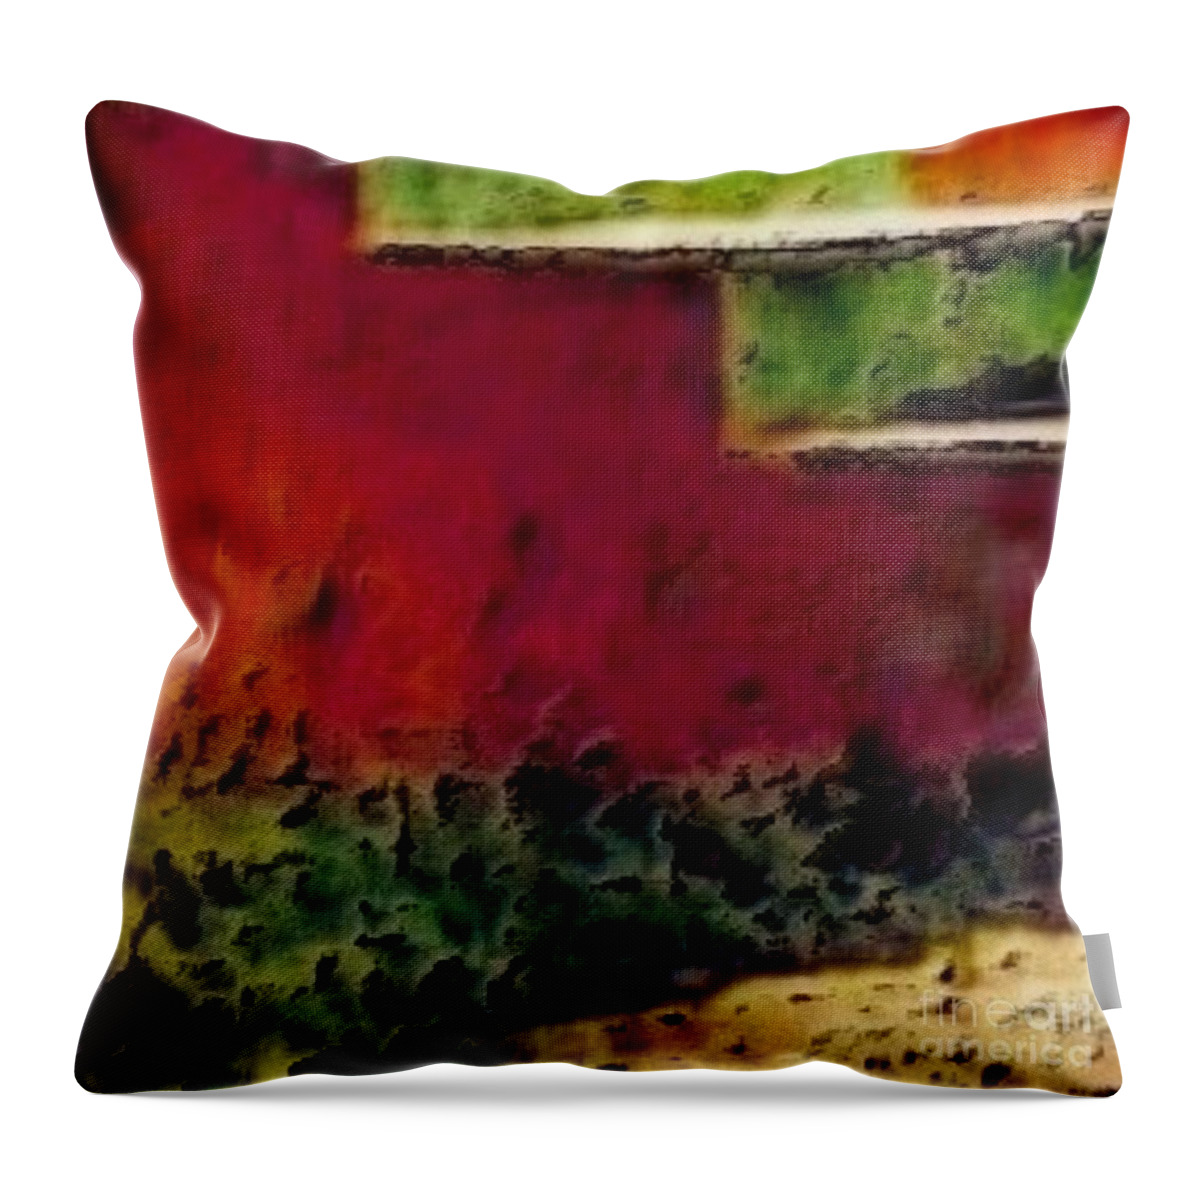 Sharkcrossing Throw Pillow featuring the digital art S Red Concrete Steps - Square by Lyn Voytershark